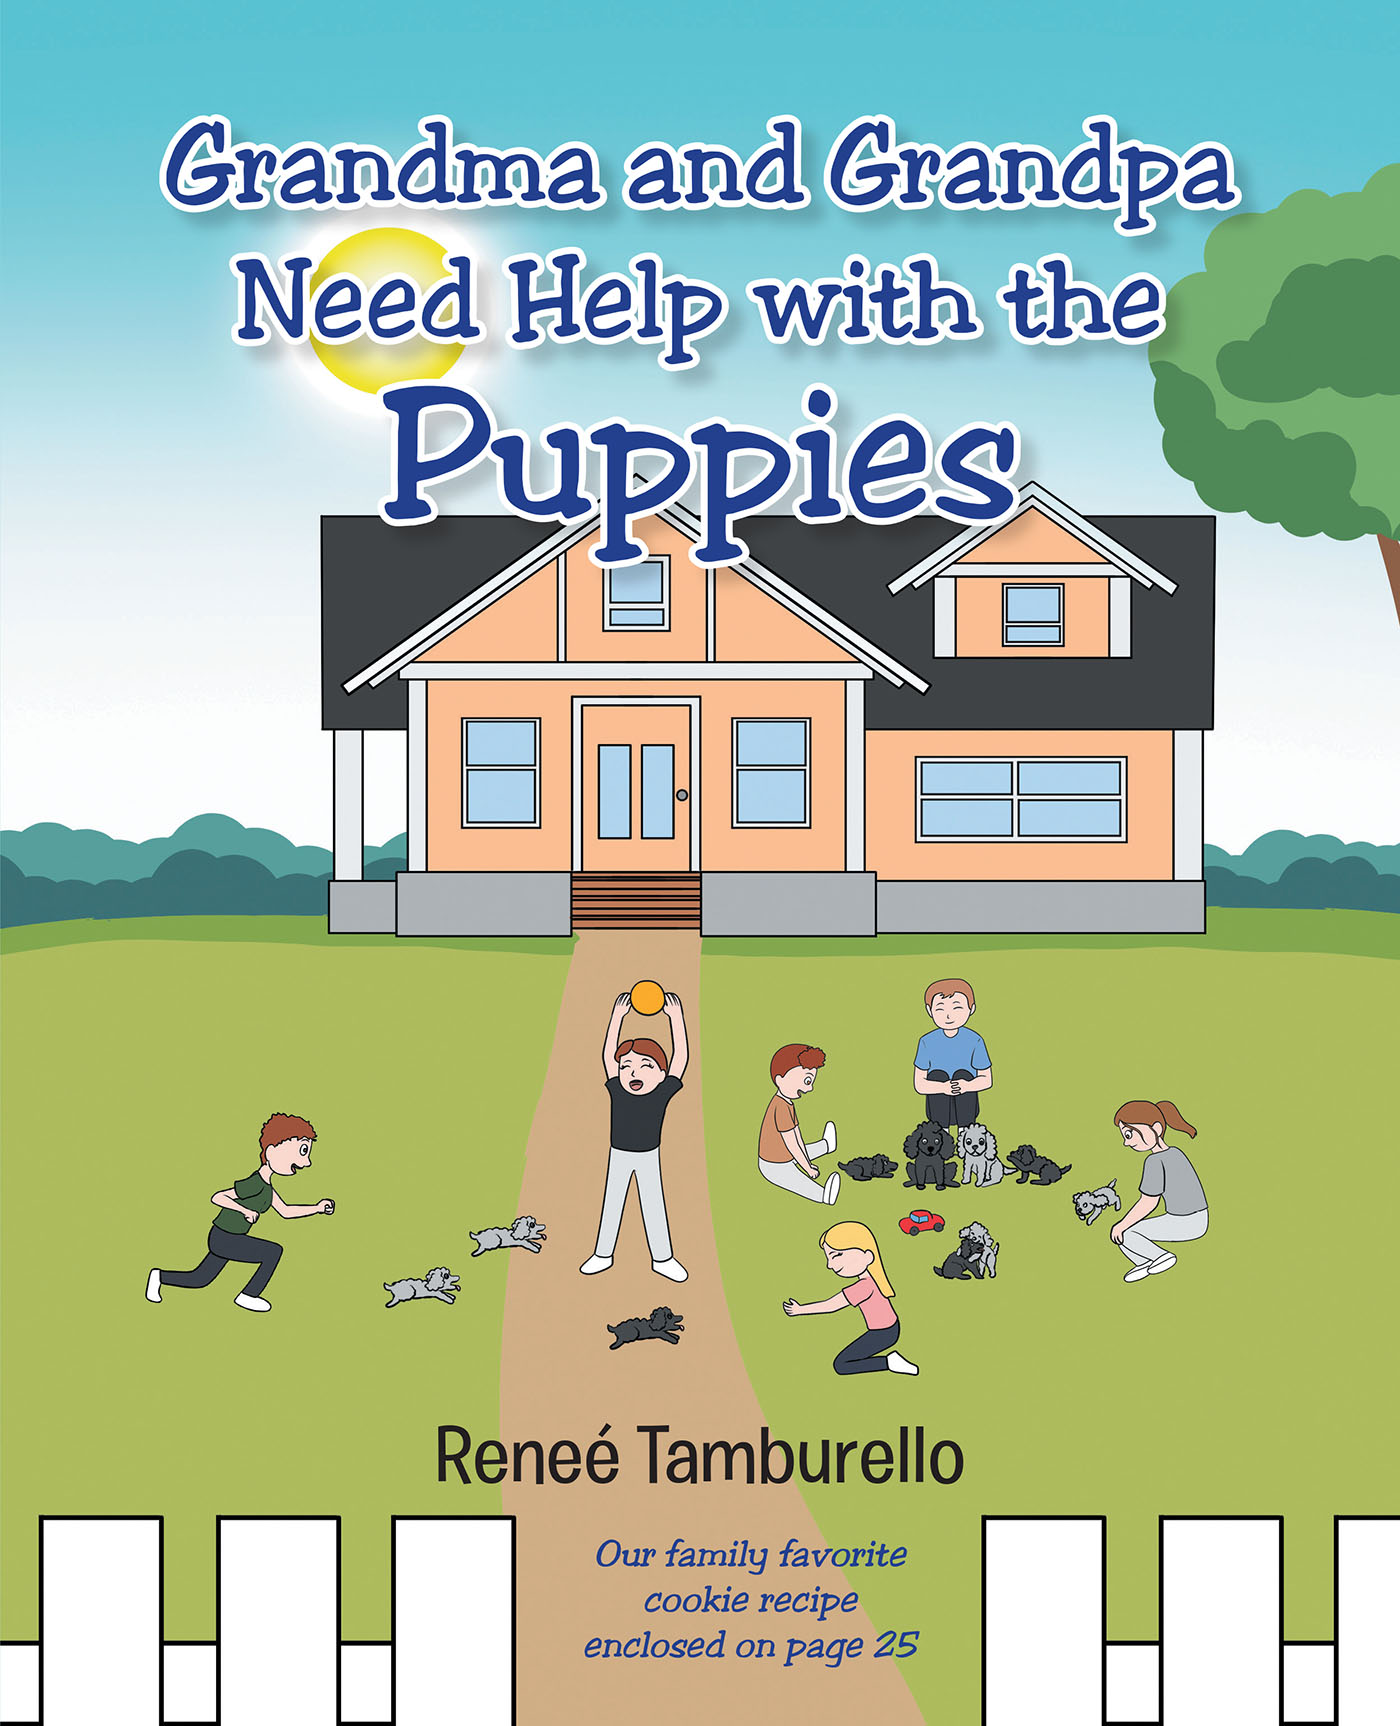 Author Reneé Tamburello’s New Book, "Grandma and Grandpa Need Help with the Puppies," Follows a Couple and Their Grandchildren as They Work to Care for a Group of Puppies